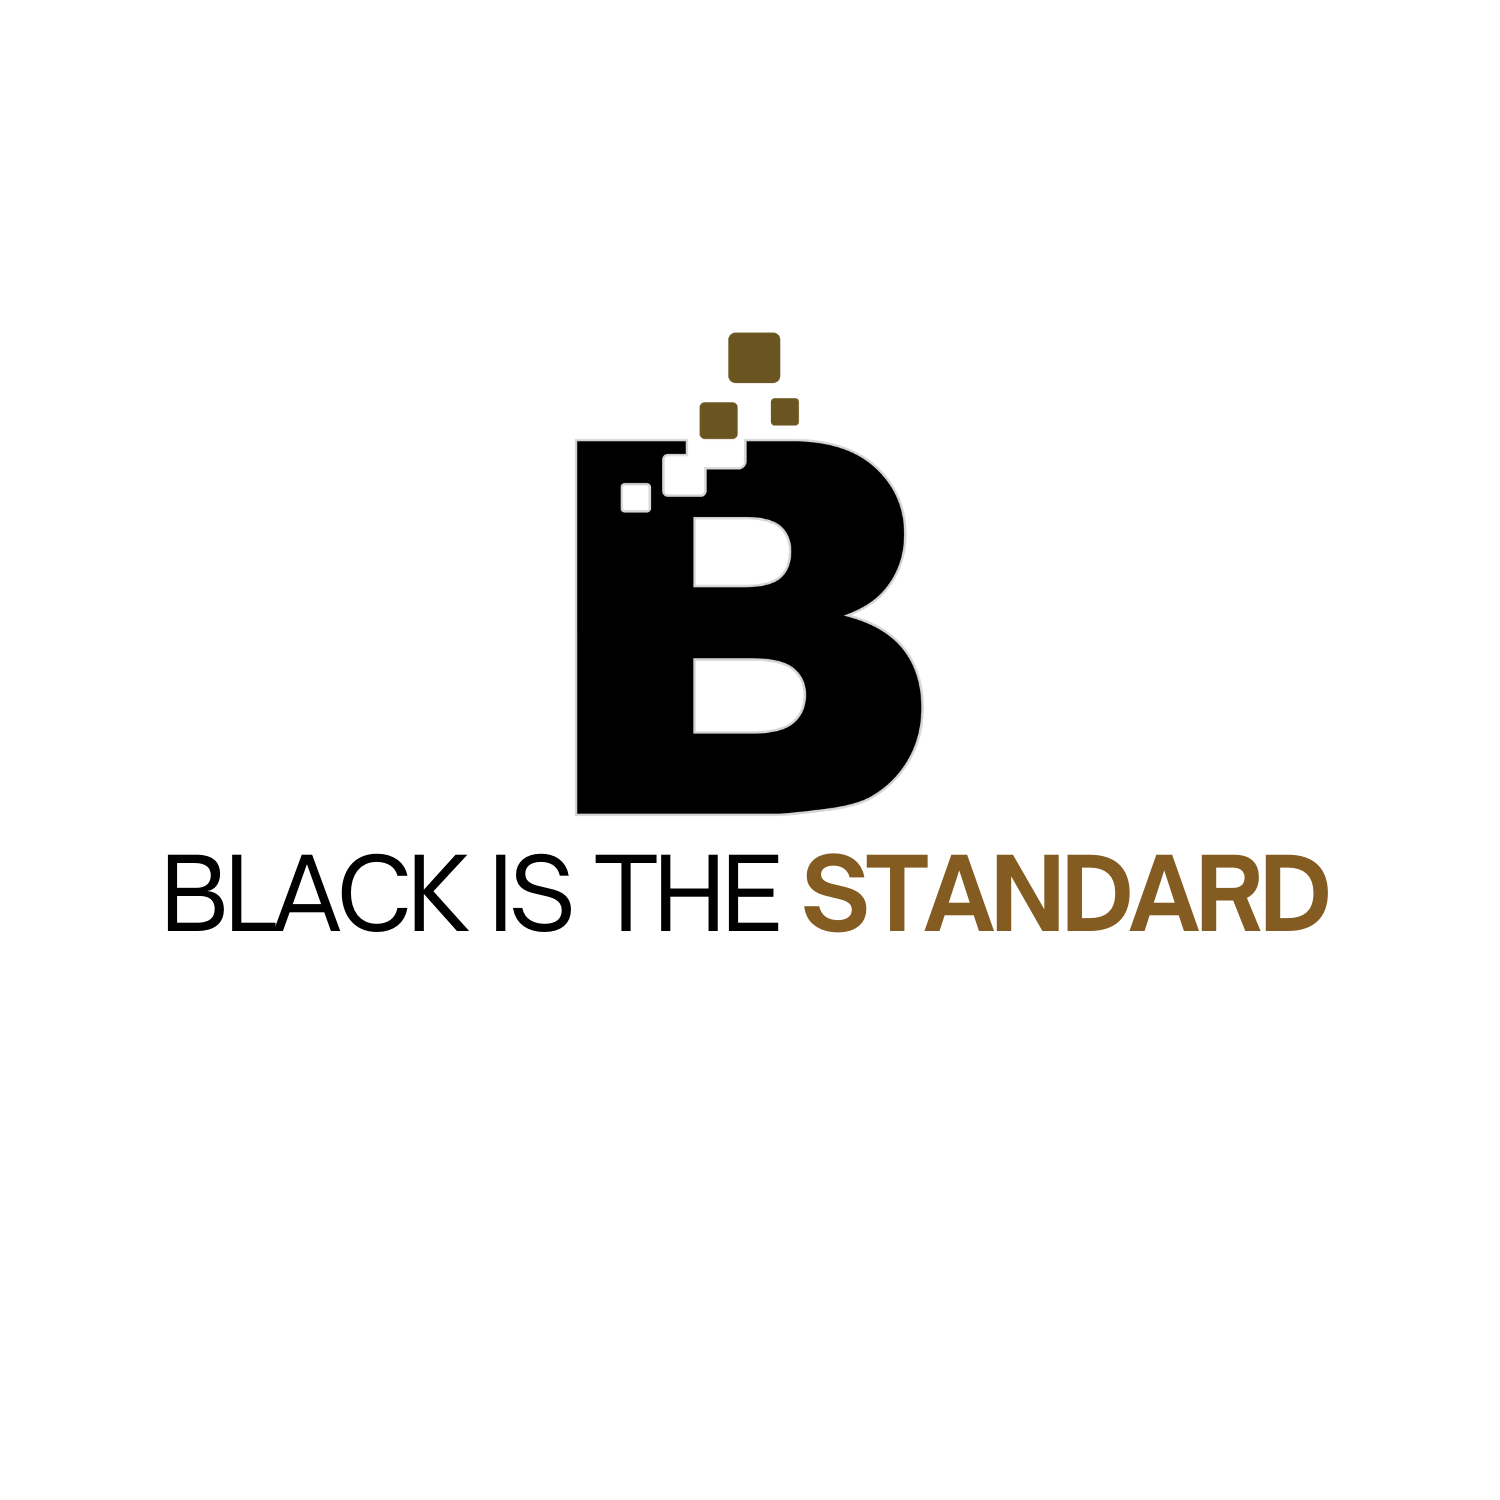 Black Is The Standard™